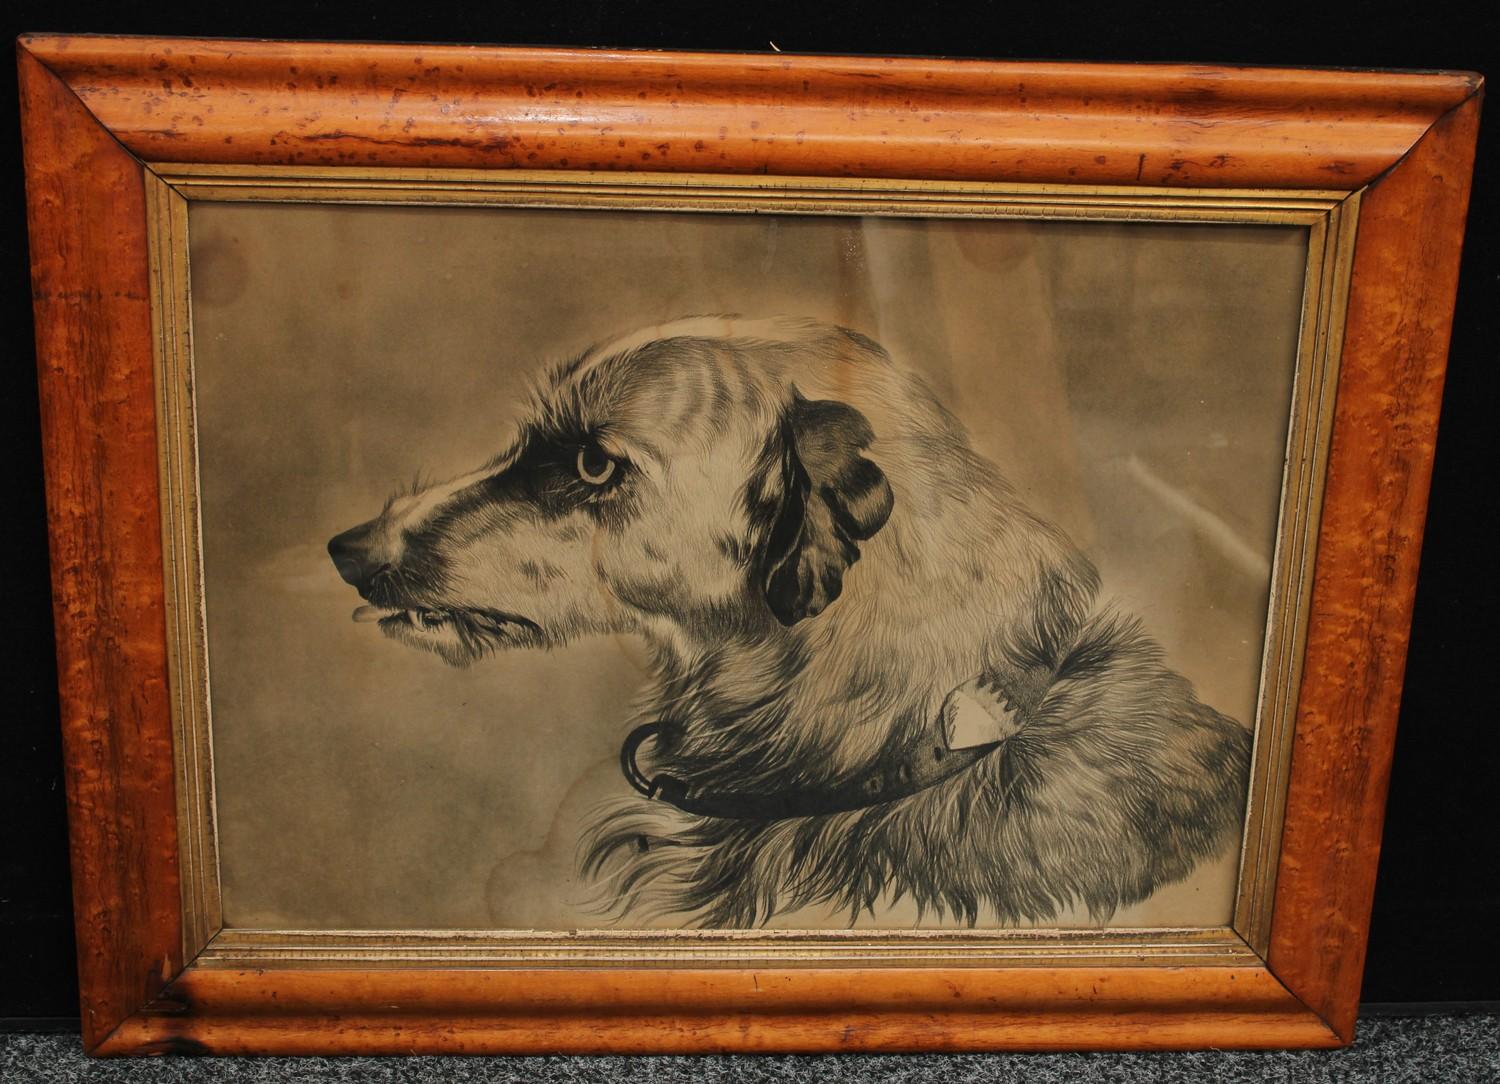 English School (19th century) Study of the Head of a Dog pencil and charcoal on paper, 43.5cm x 60.